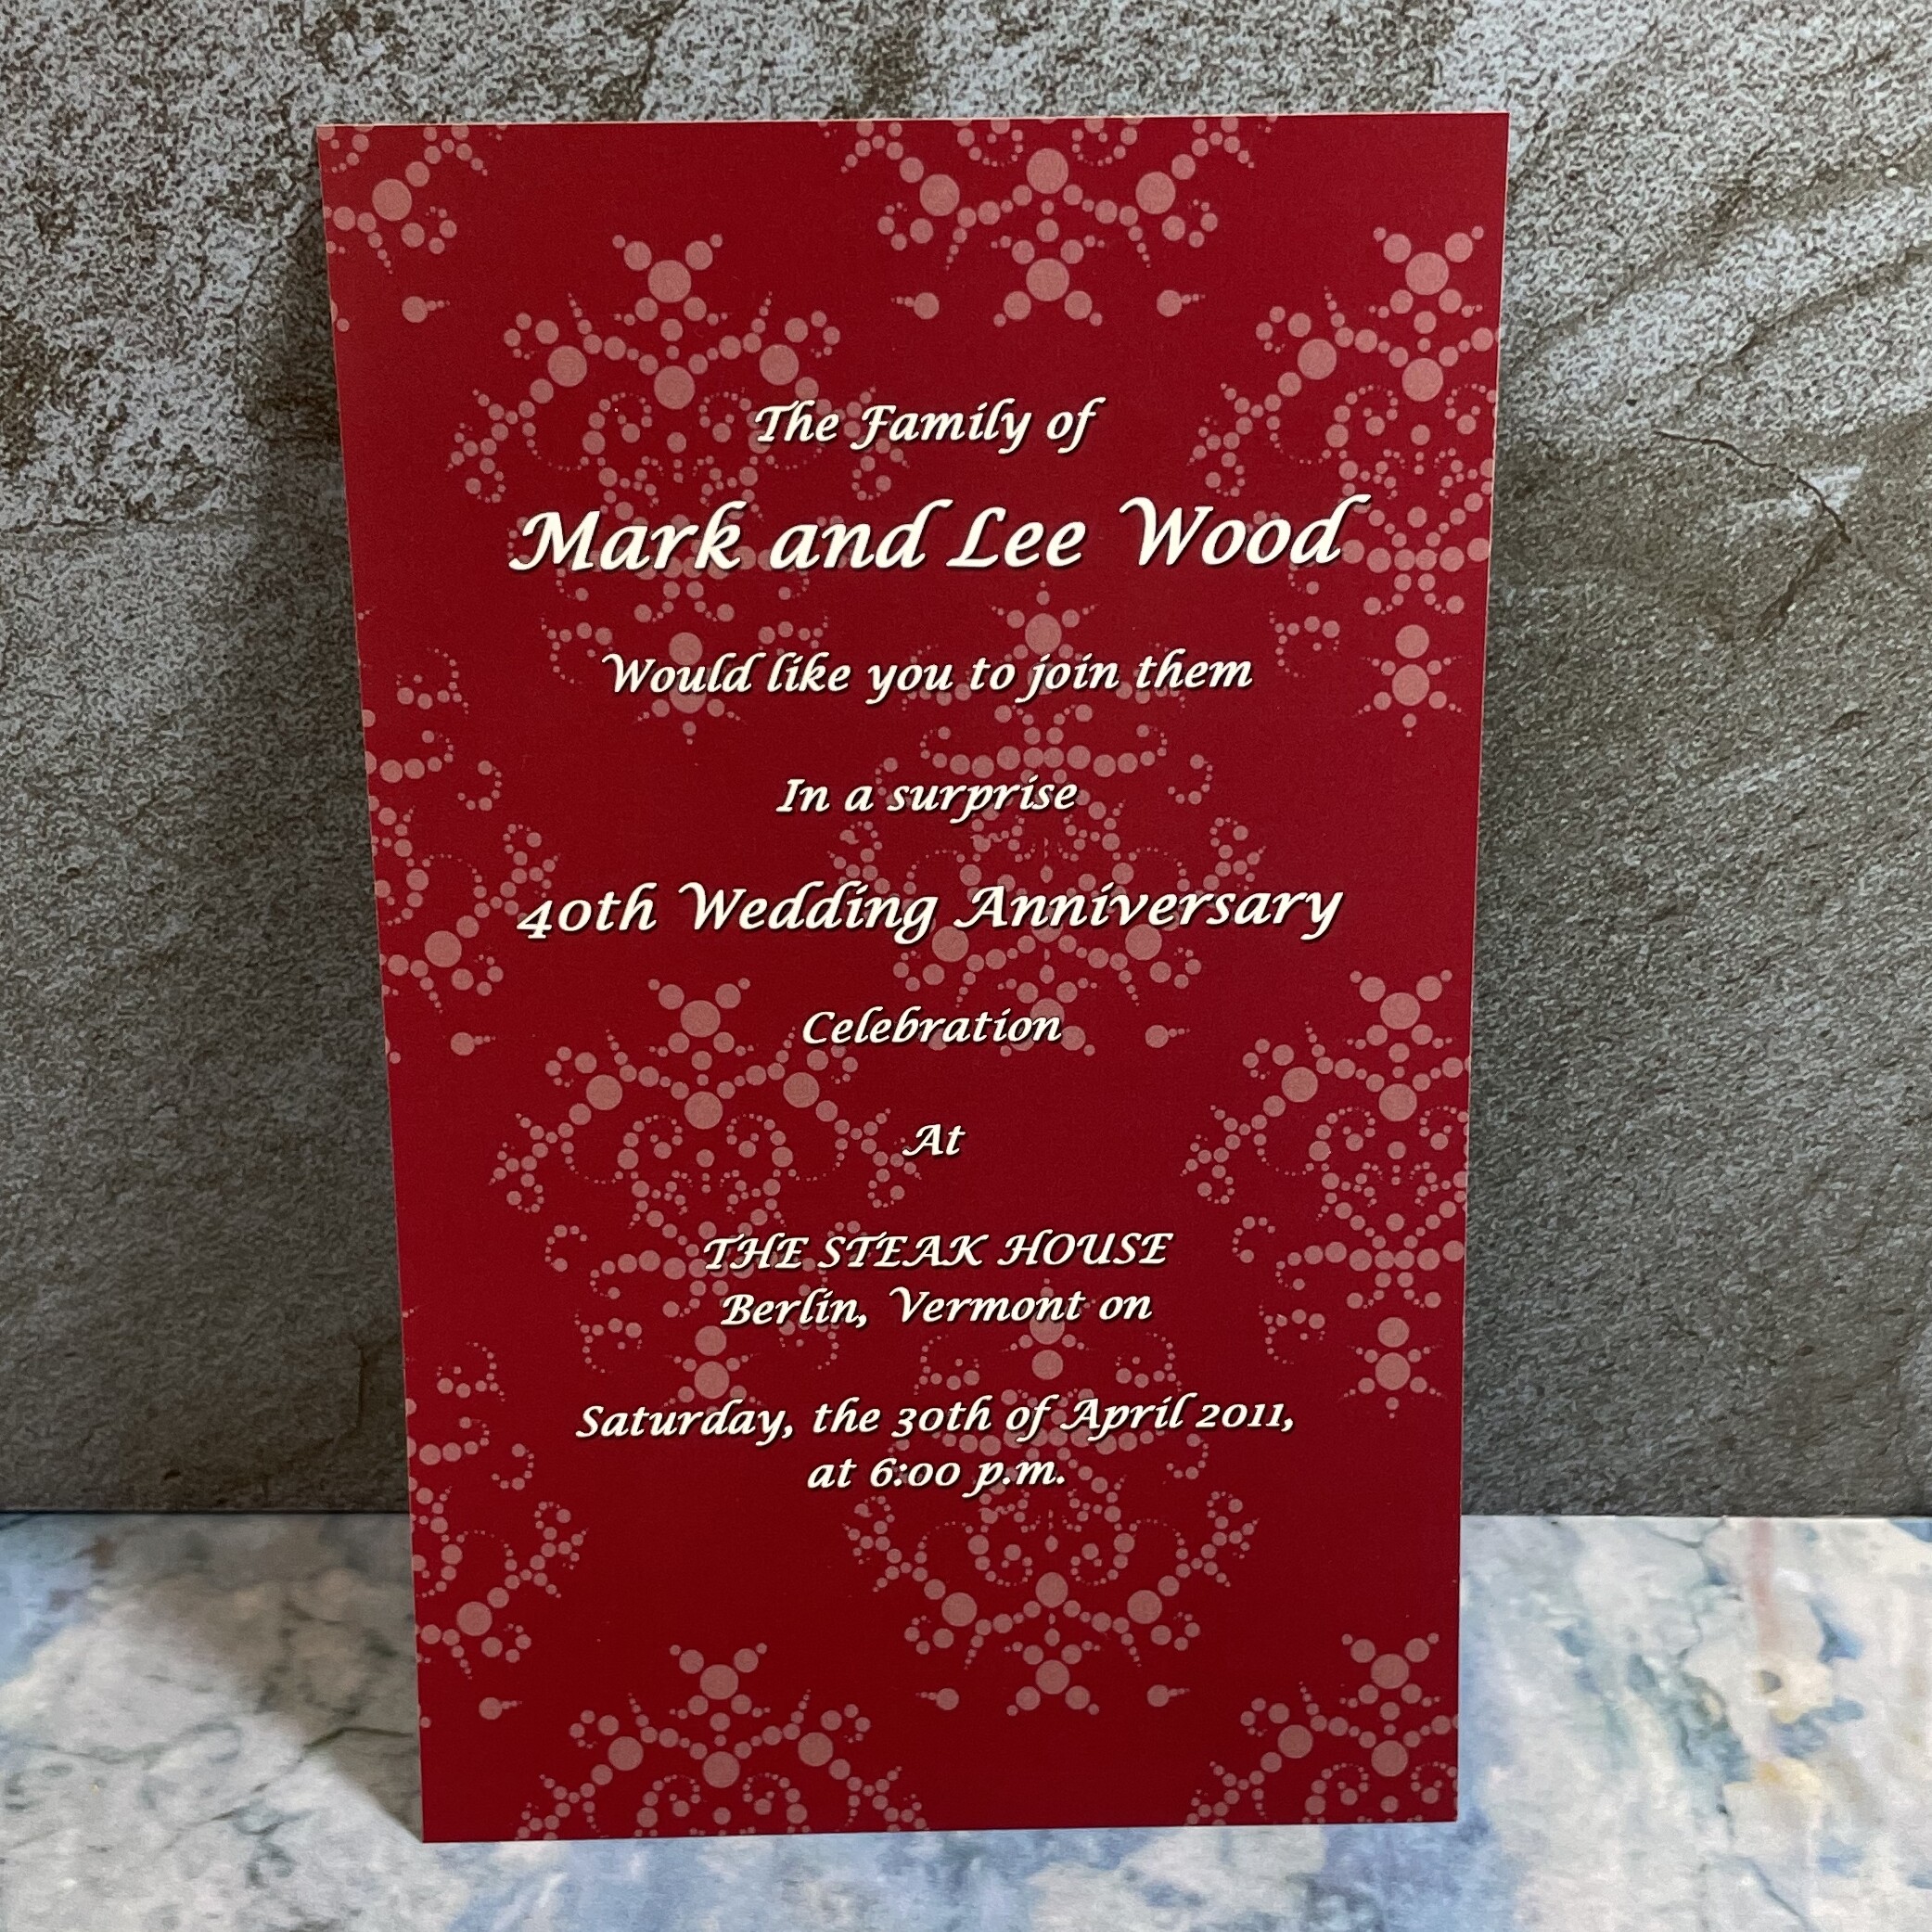 Surprise Wedding Anniversary Invitation for Mark and Lee